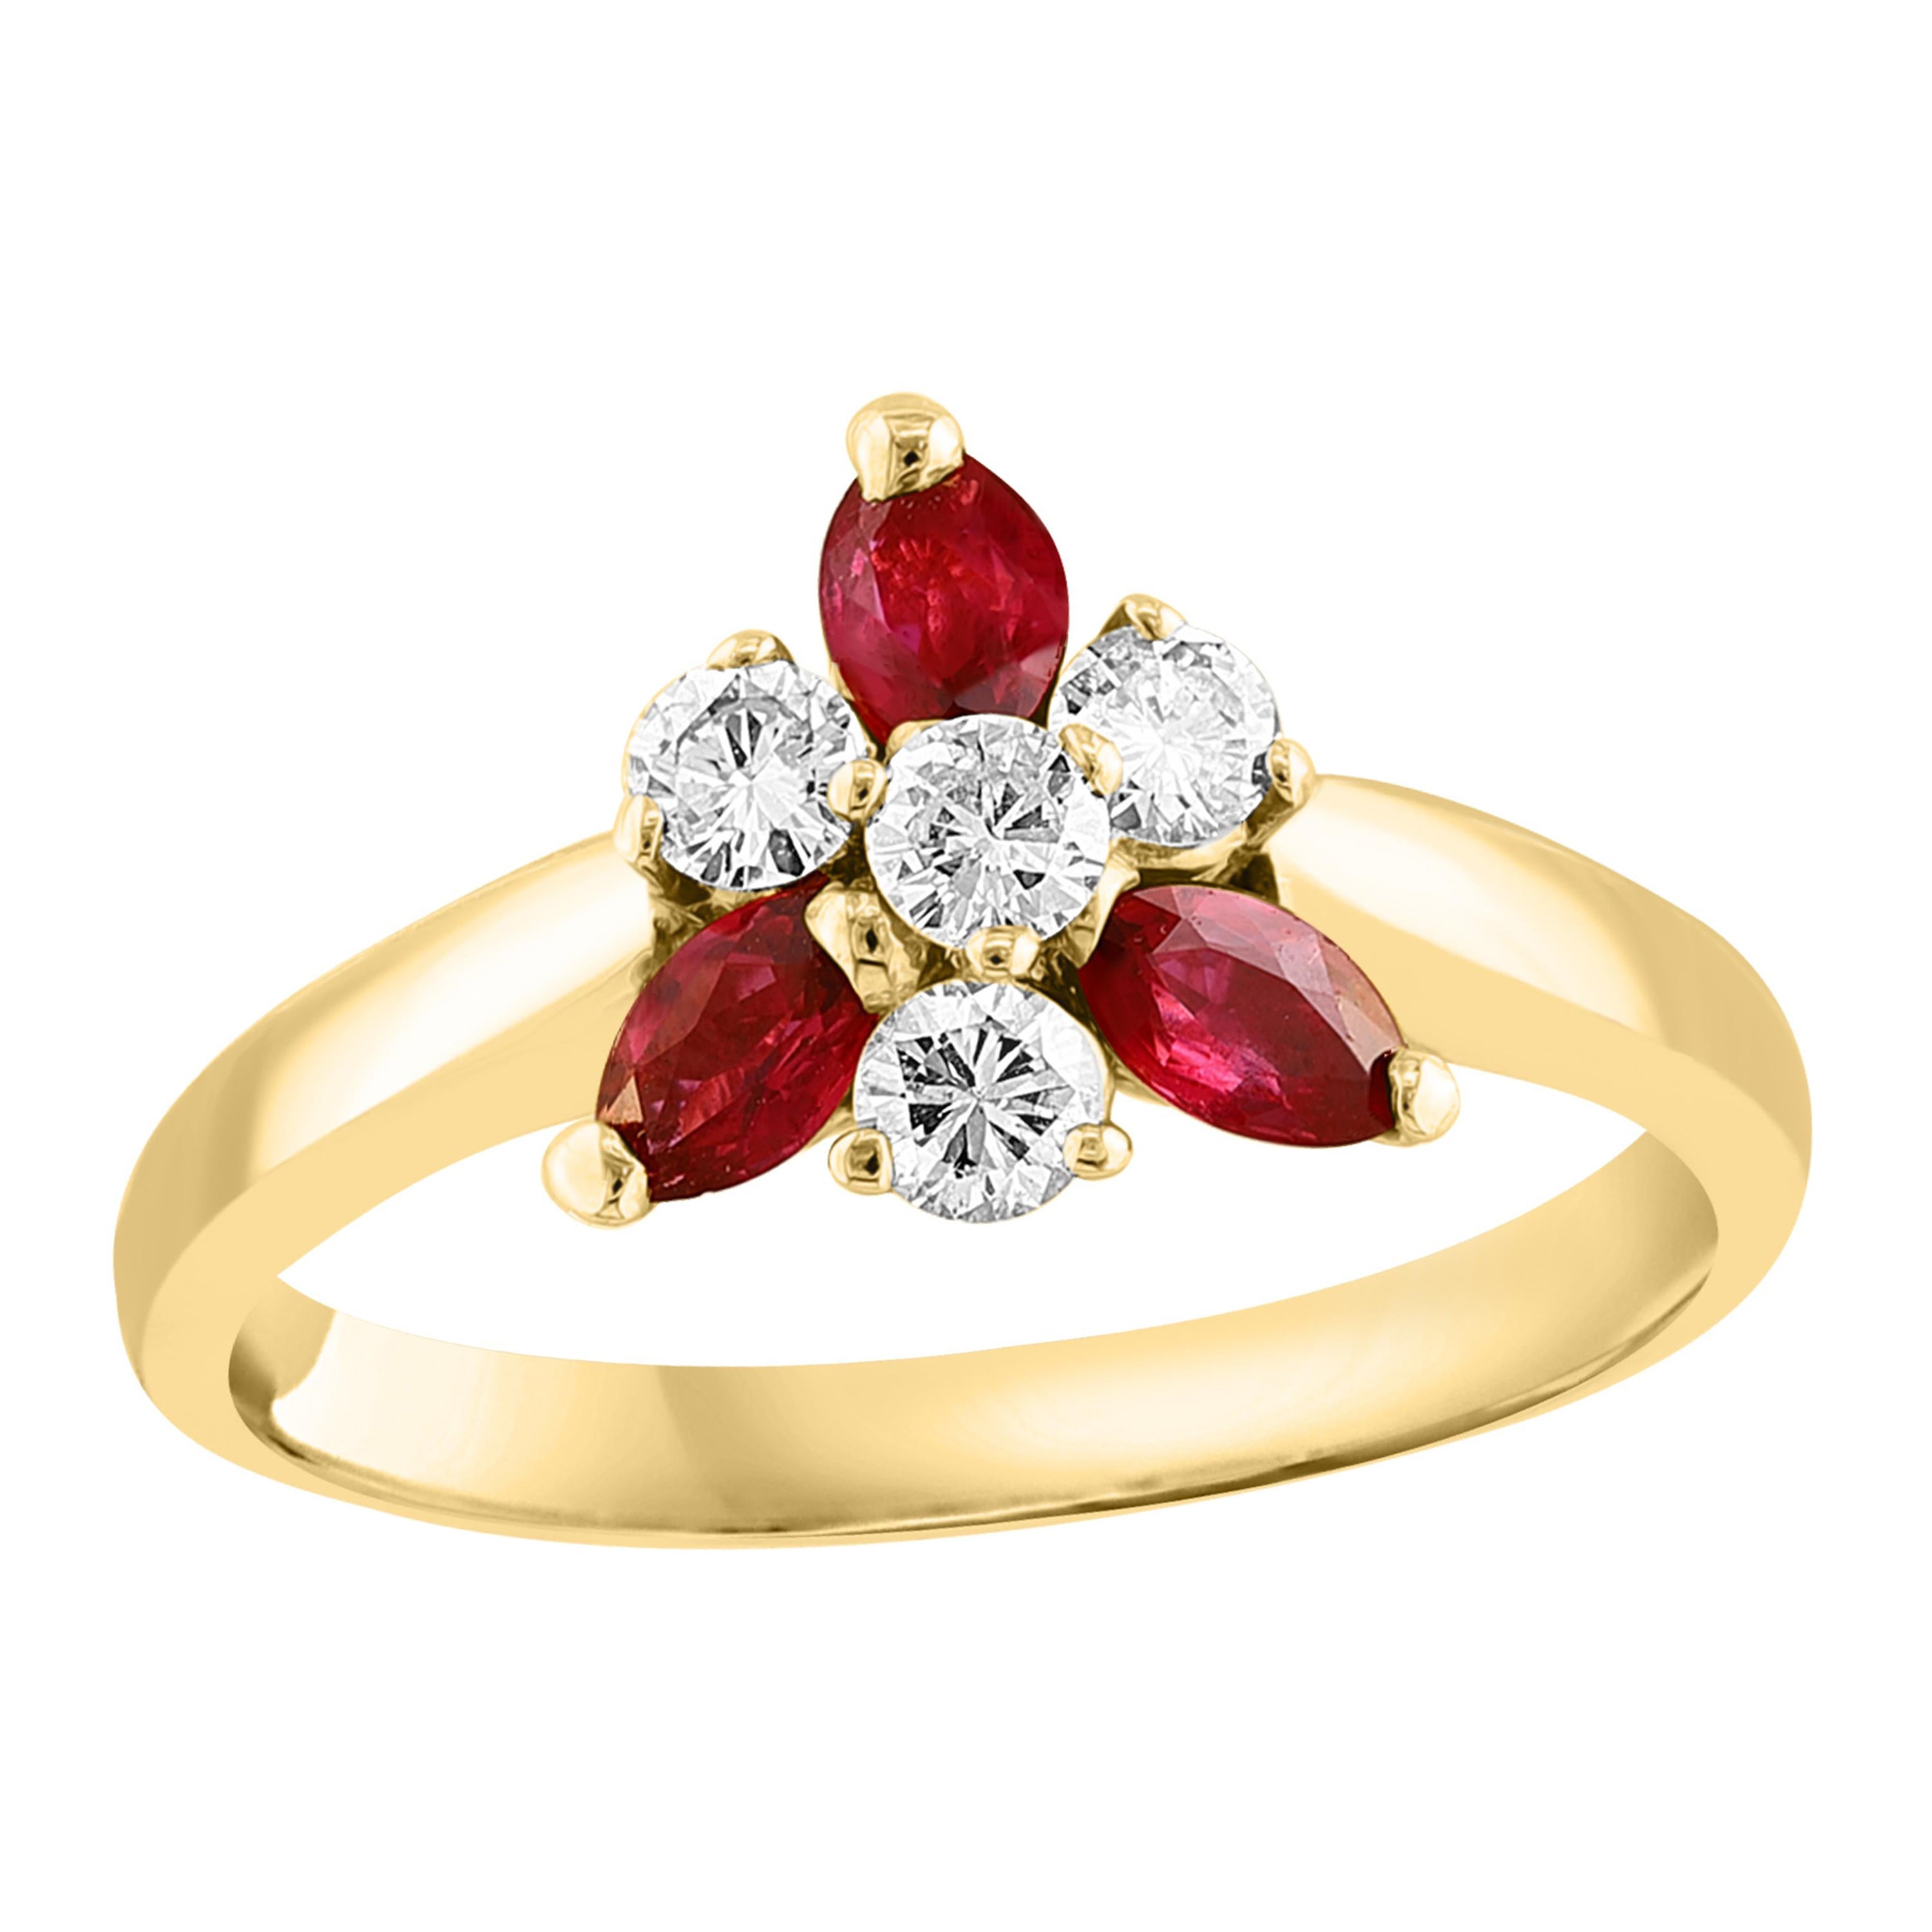 0.39 Carat Brilliant Cut Ruby and Diamond Ring in 14K Yellow Gold For Sale